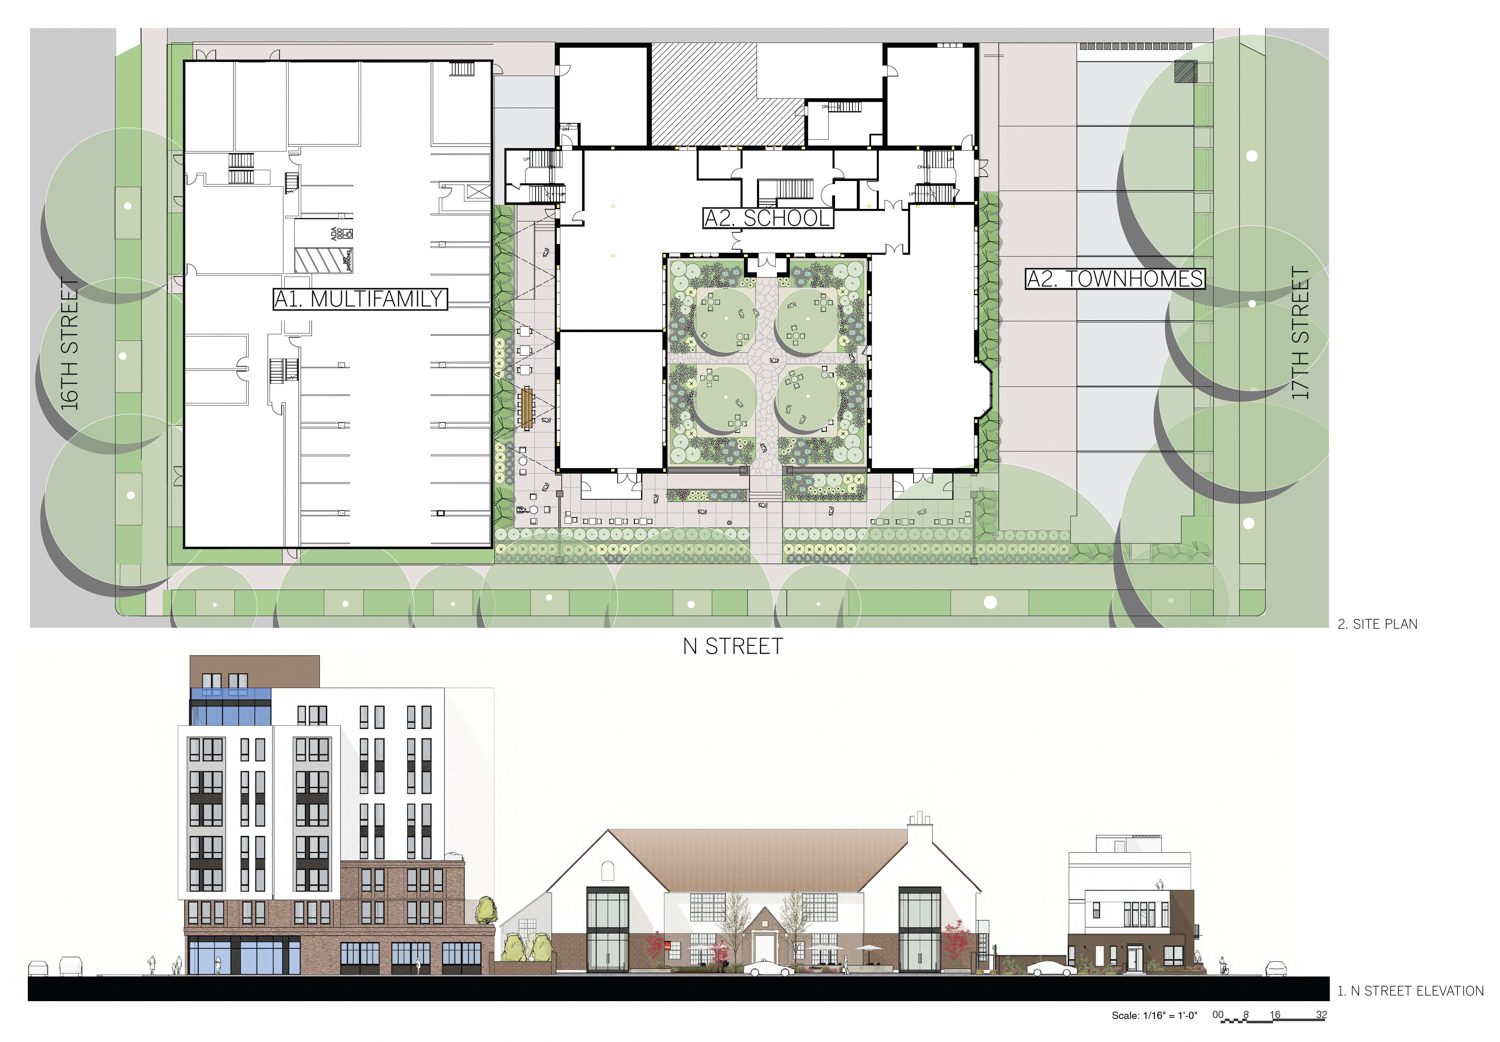 1619 N Street site map, rendering by Vrilakas Groen Architects